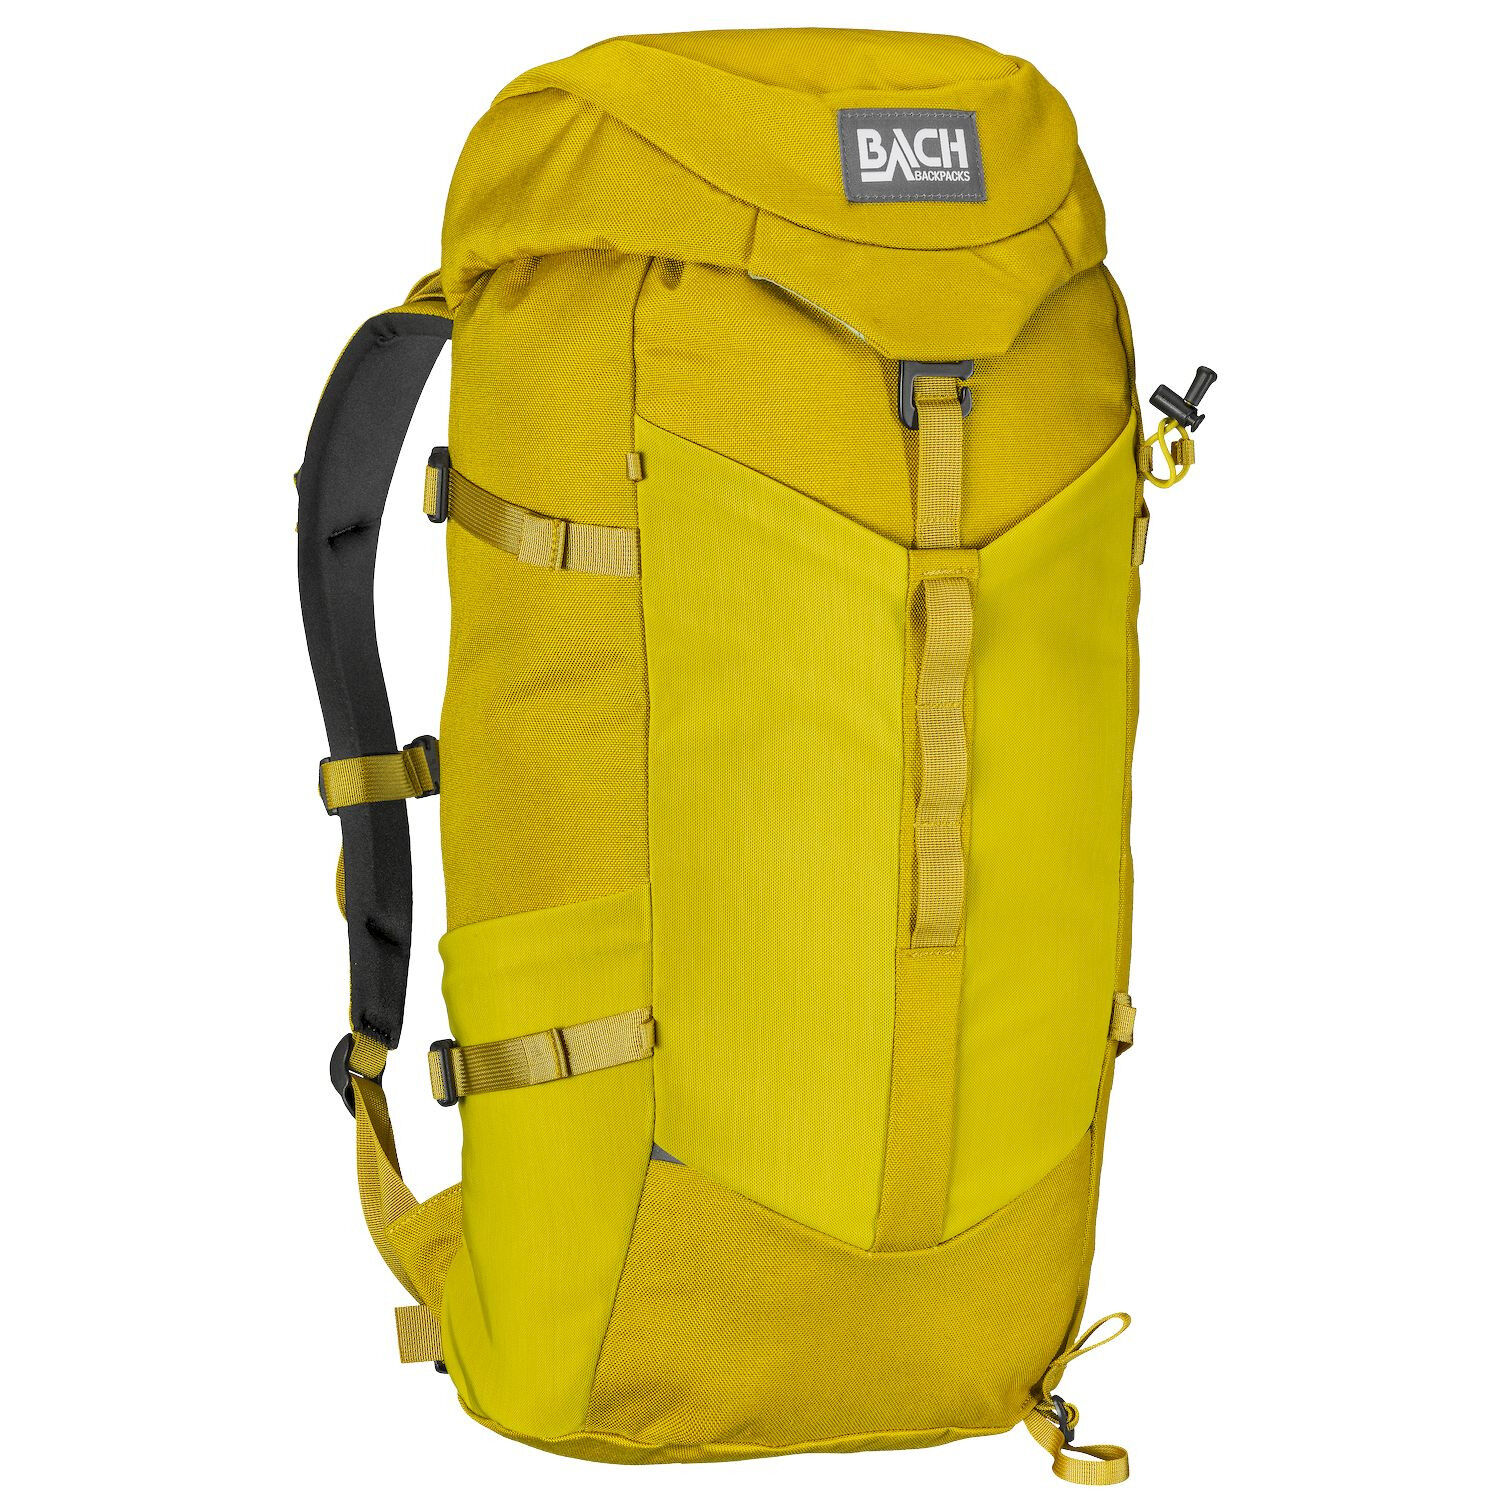 Bach Pack Roc 28 - Walking backpack